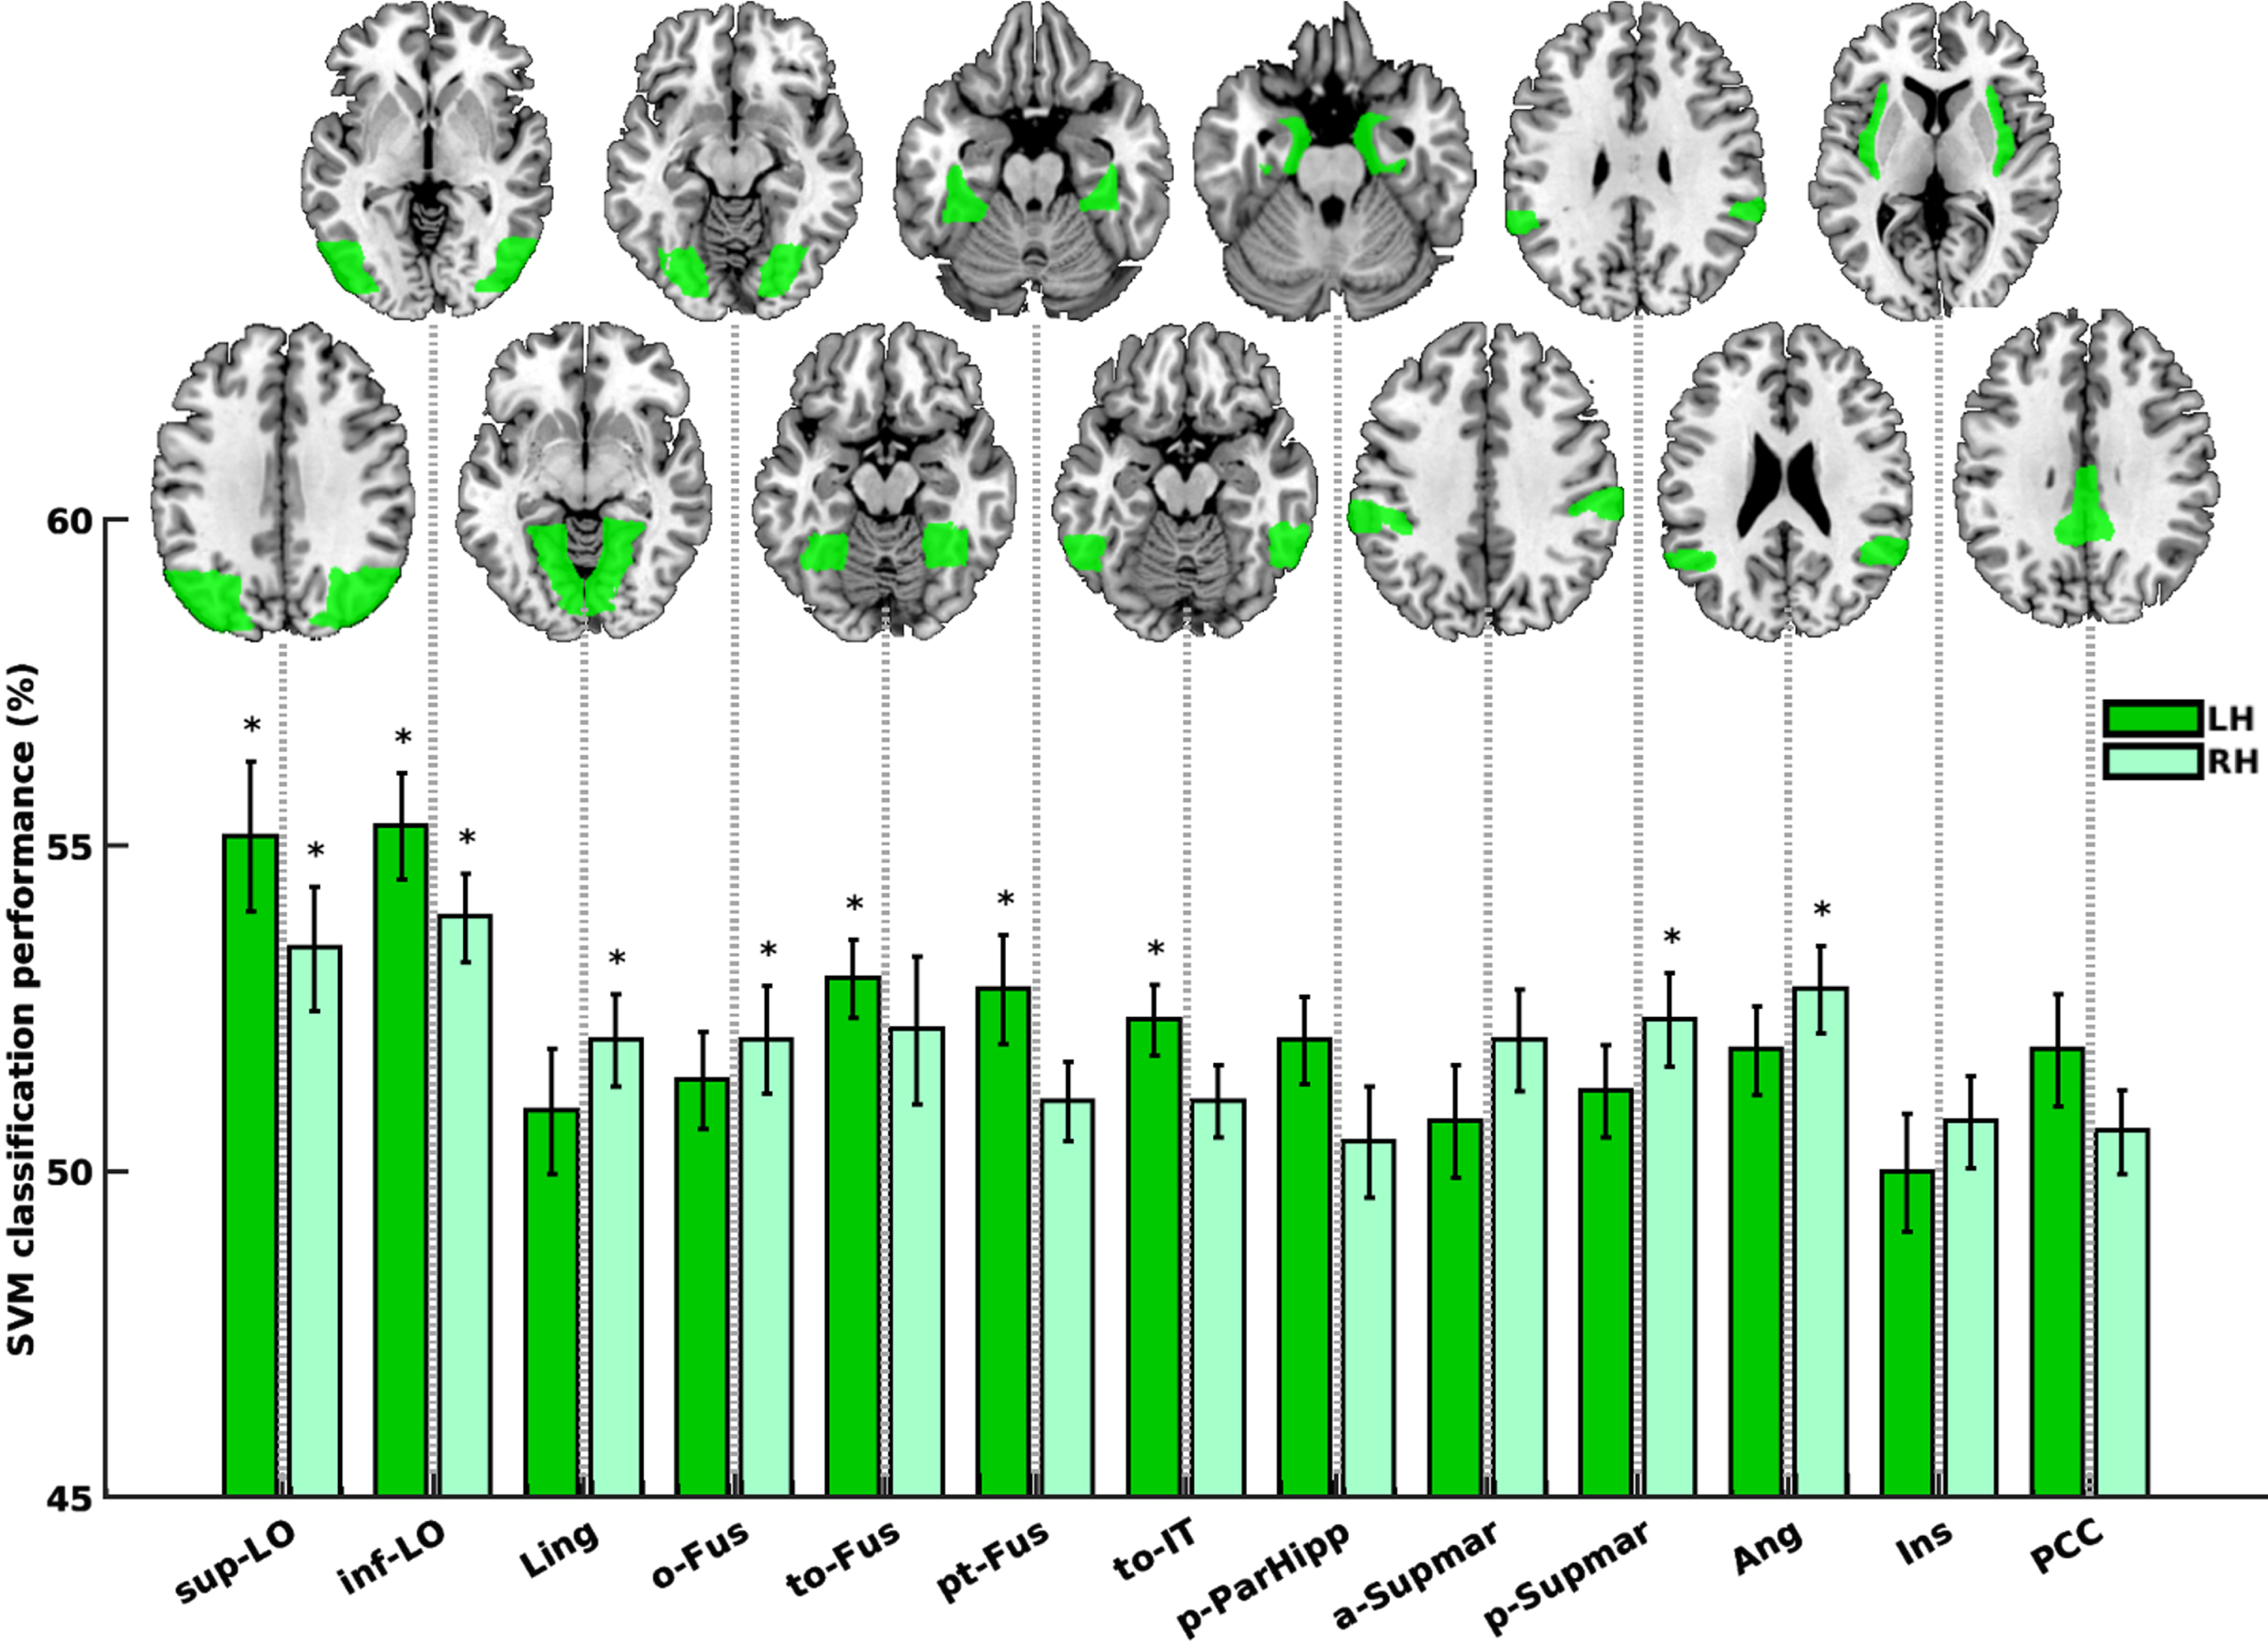 Animacy decoding in the HC group. Dark and light green bars represent the left and right hemispheres, respectively. Bars marked with asterisk (*) are regions remained significant following FDR correction. sup-LO, lateral occipital cortex, superior division; inf-LO, lateral occipital cortex, inferior division; Ling, lingual gyrus; o-Fus, occipital fusiform gyrus; to-Fus, temporal occipital fusiform cortex; pt-Fus, temporal fusiform cortex, posterior division; to-IT, inferior temporal gyrus, temporooccipital part; p-ParaHipp, parahippocampal gyrus, posterior division; a-Supmar, supramarginal gyrus, anterior division; p-Supmar, supramarginal gyrus, posterior division; Ang, angular gyrus; Ins, insular cortex; PCC, cingulate gyrus, posterior division.